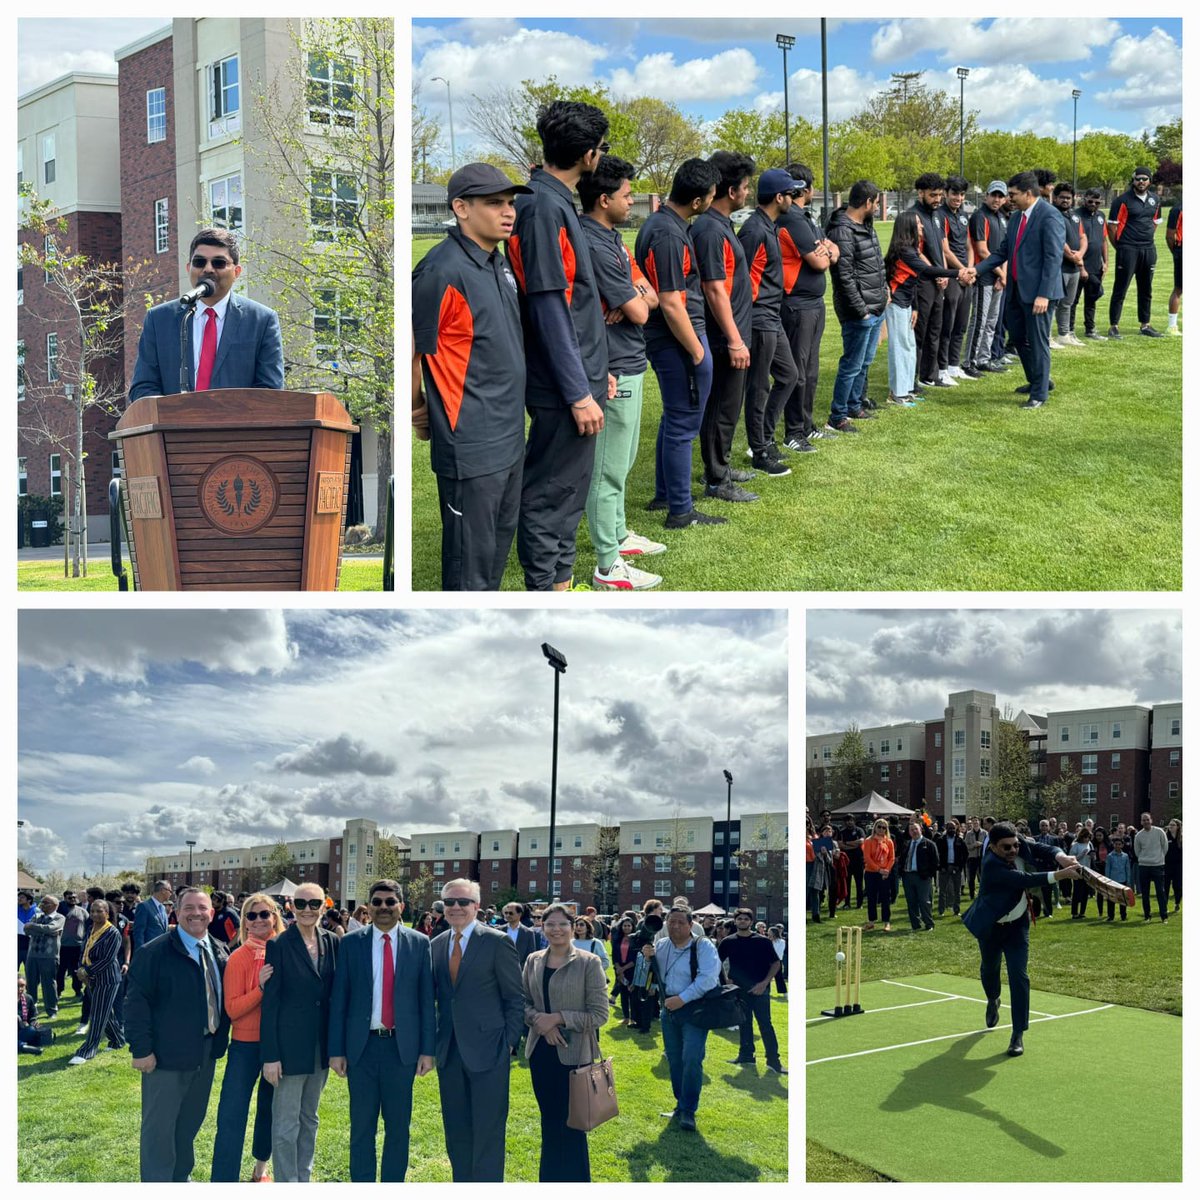 Consul General [CG] Dr. K. Srikar Reddy along with the Pacific President Christopher Callahan @PacificPres inaugurated the new Cricket pitch today at the University of the Pacific. @UOPacific CG held discussions with President Callahan and senior faculty members regarding…